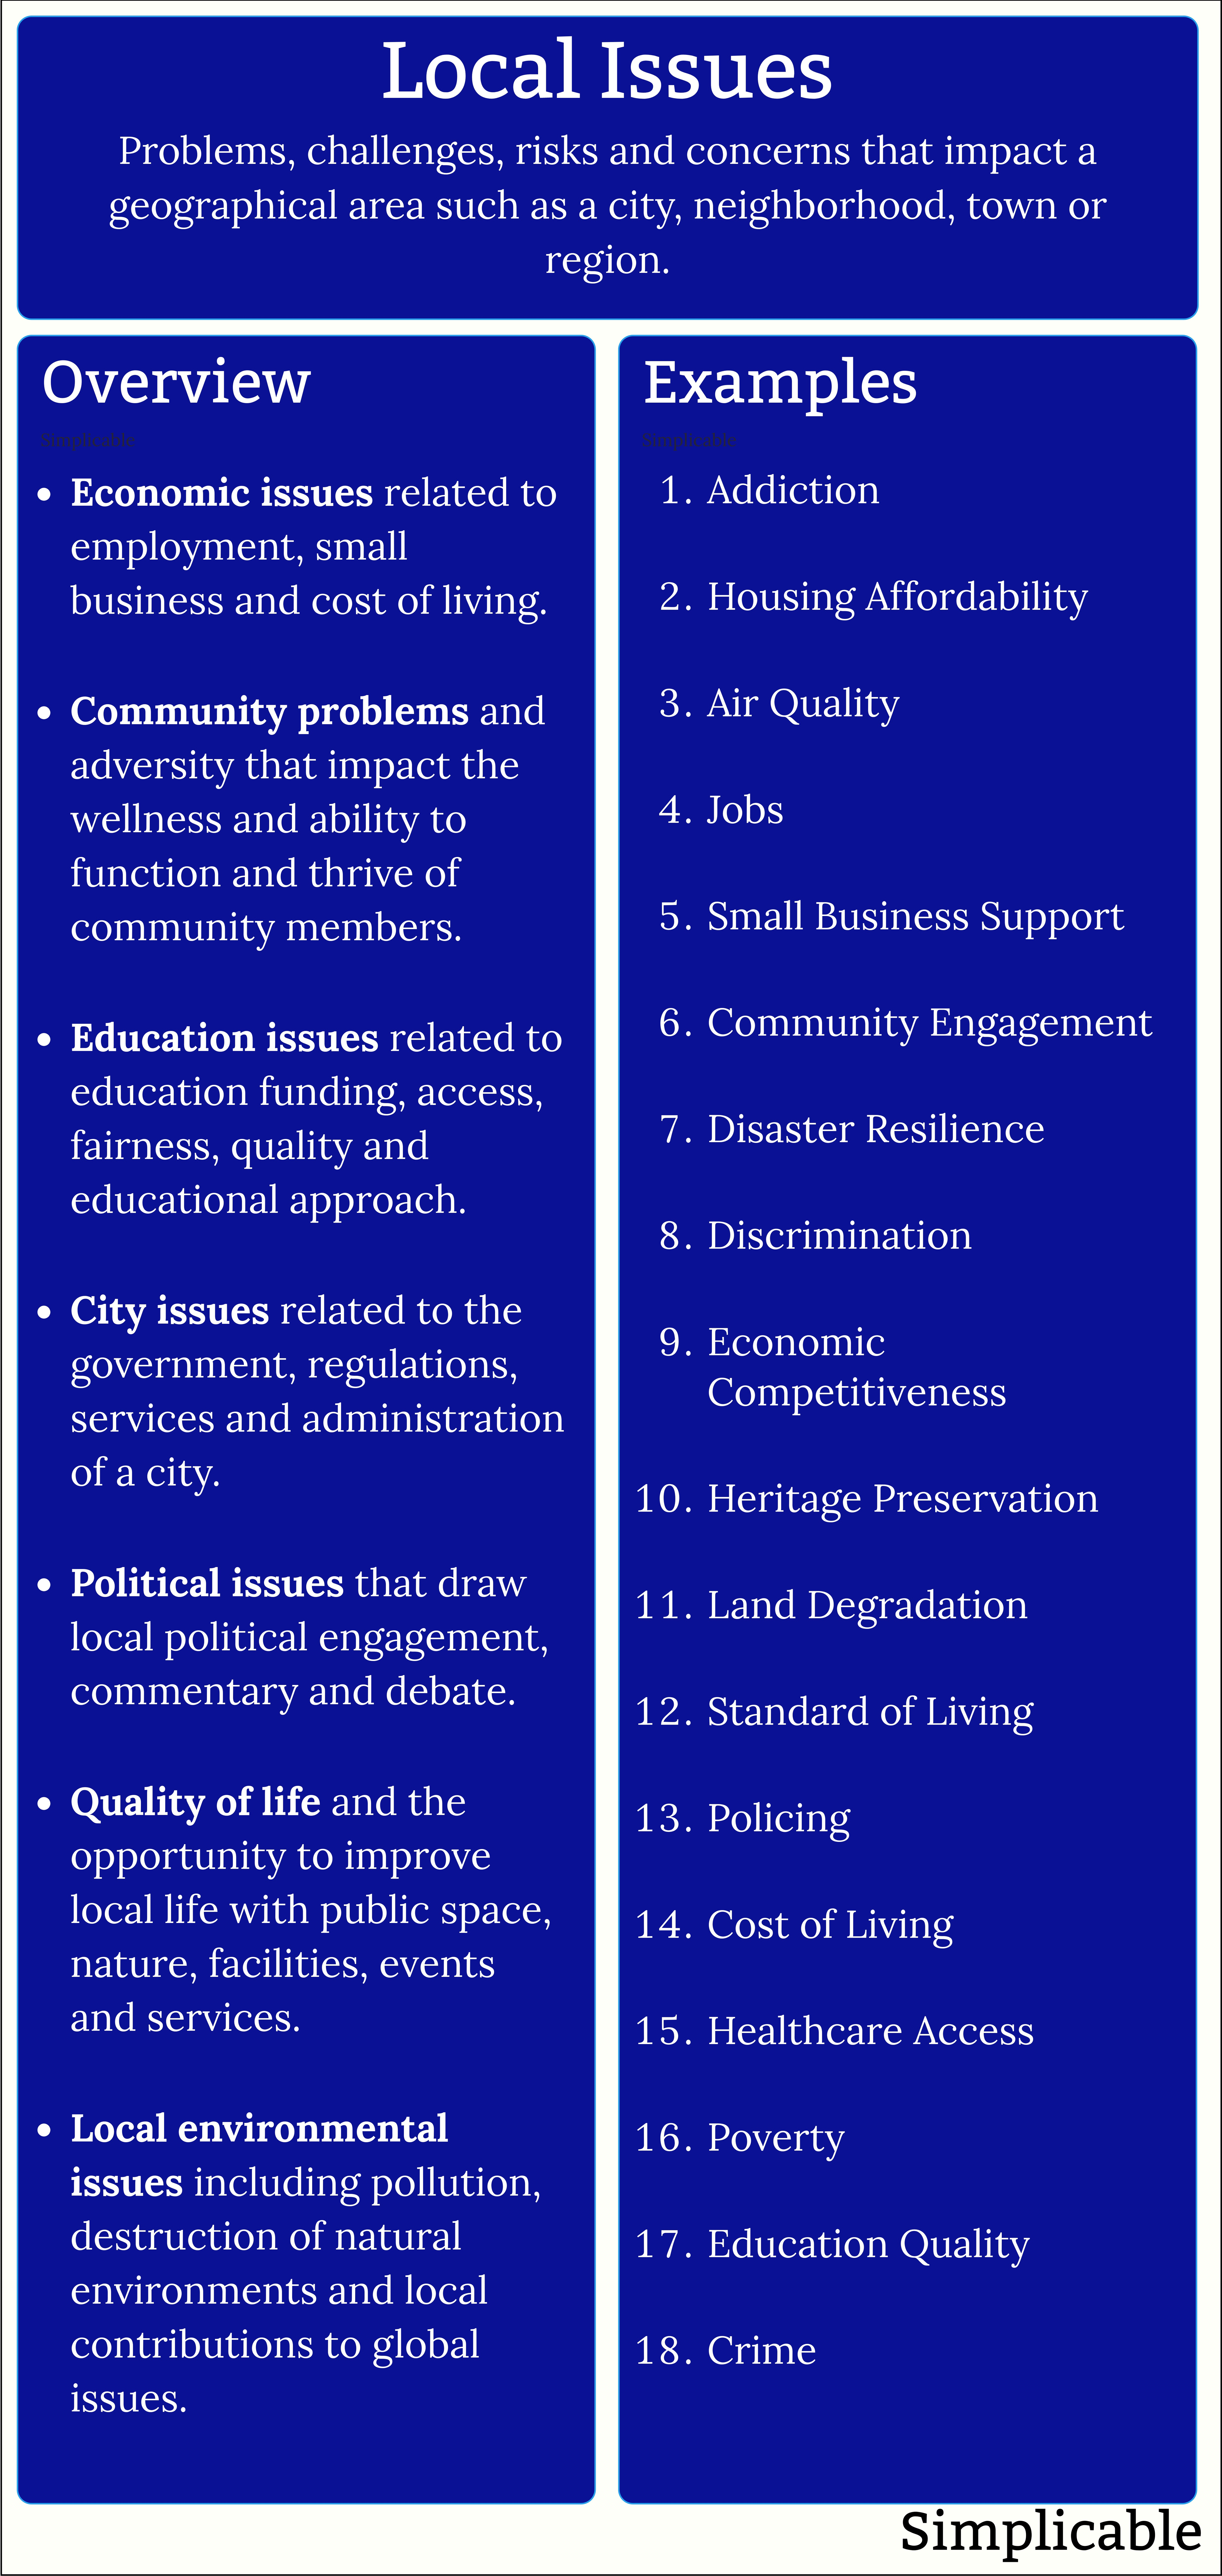 local issues overview and examples